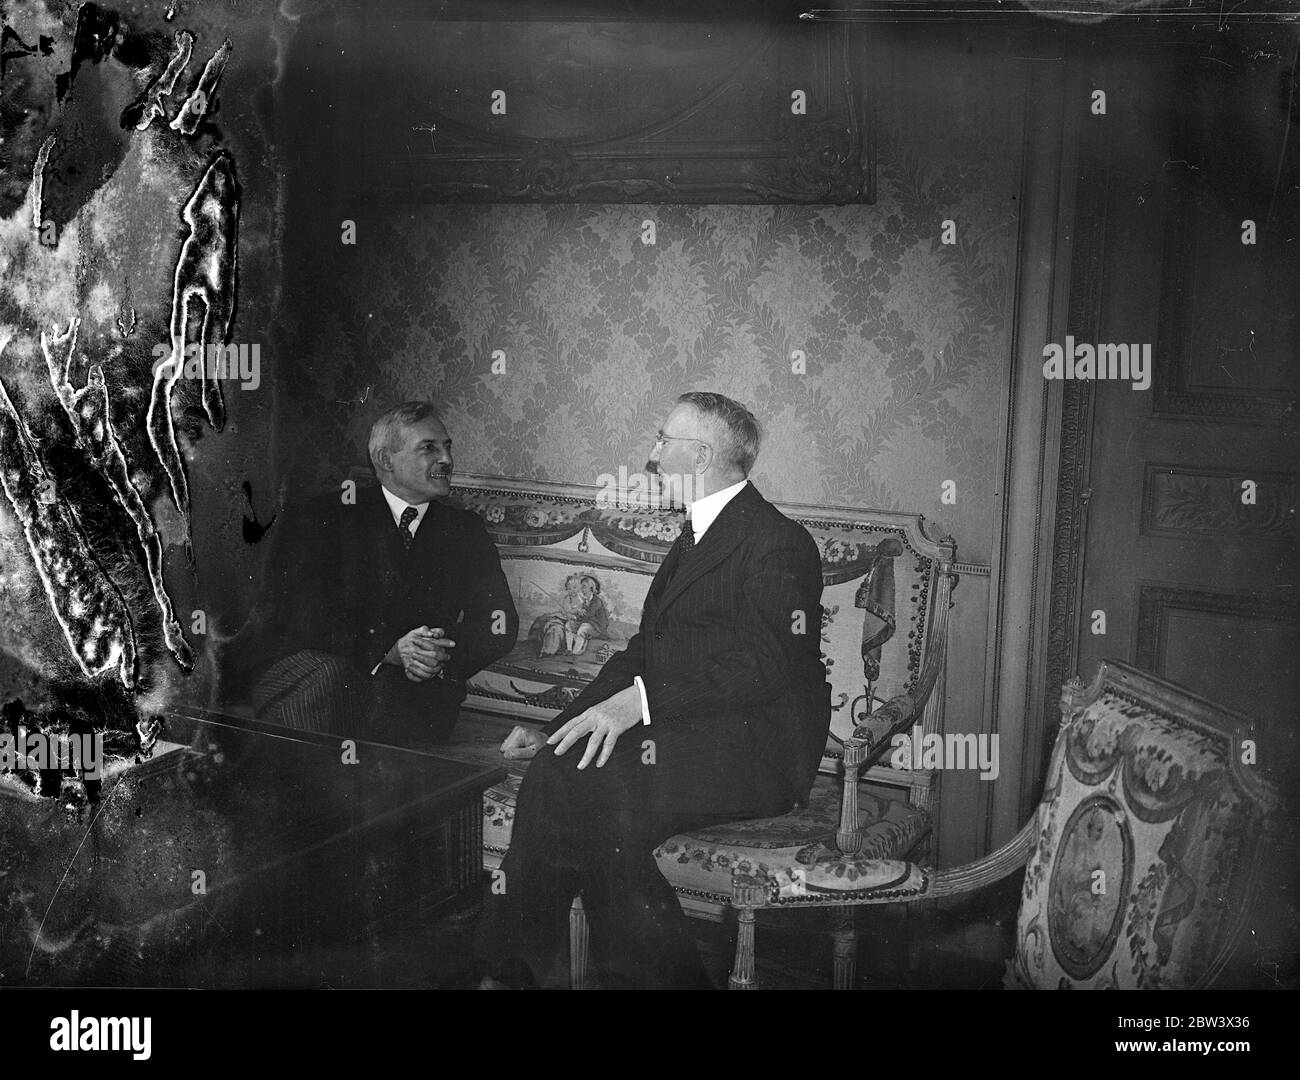 Dr . Schacht Confers With Governor Of The Bank Of France In Paris . Dr . Hjalmar Schacht , the Governor of the Reichsbank and Germany ' s Minister of Economics , had a conversation with Mr . Émile Labeyrie , the Governor of the Bank of France , at the Bank of France in Paris . Afterward Dr . Schacht was the guest of Mr . Labeyrie at a luncheon attended by premier Blum and other Ministers . It is believed that Dr . Schacht ' s visit to Paris is connected with Germany ' s need for credit . Photo shows : Dr . Schacht ( right ) with Mr . Labeyrie at the Bank of France . 26 Aug 1936 Original captio Stock Photo